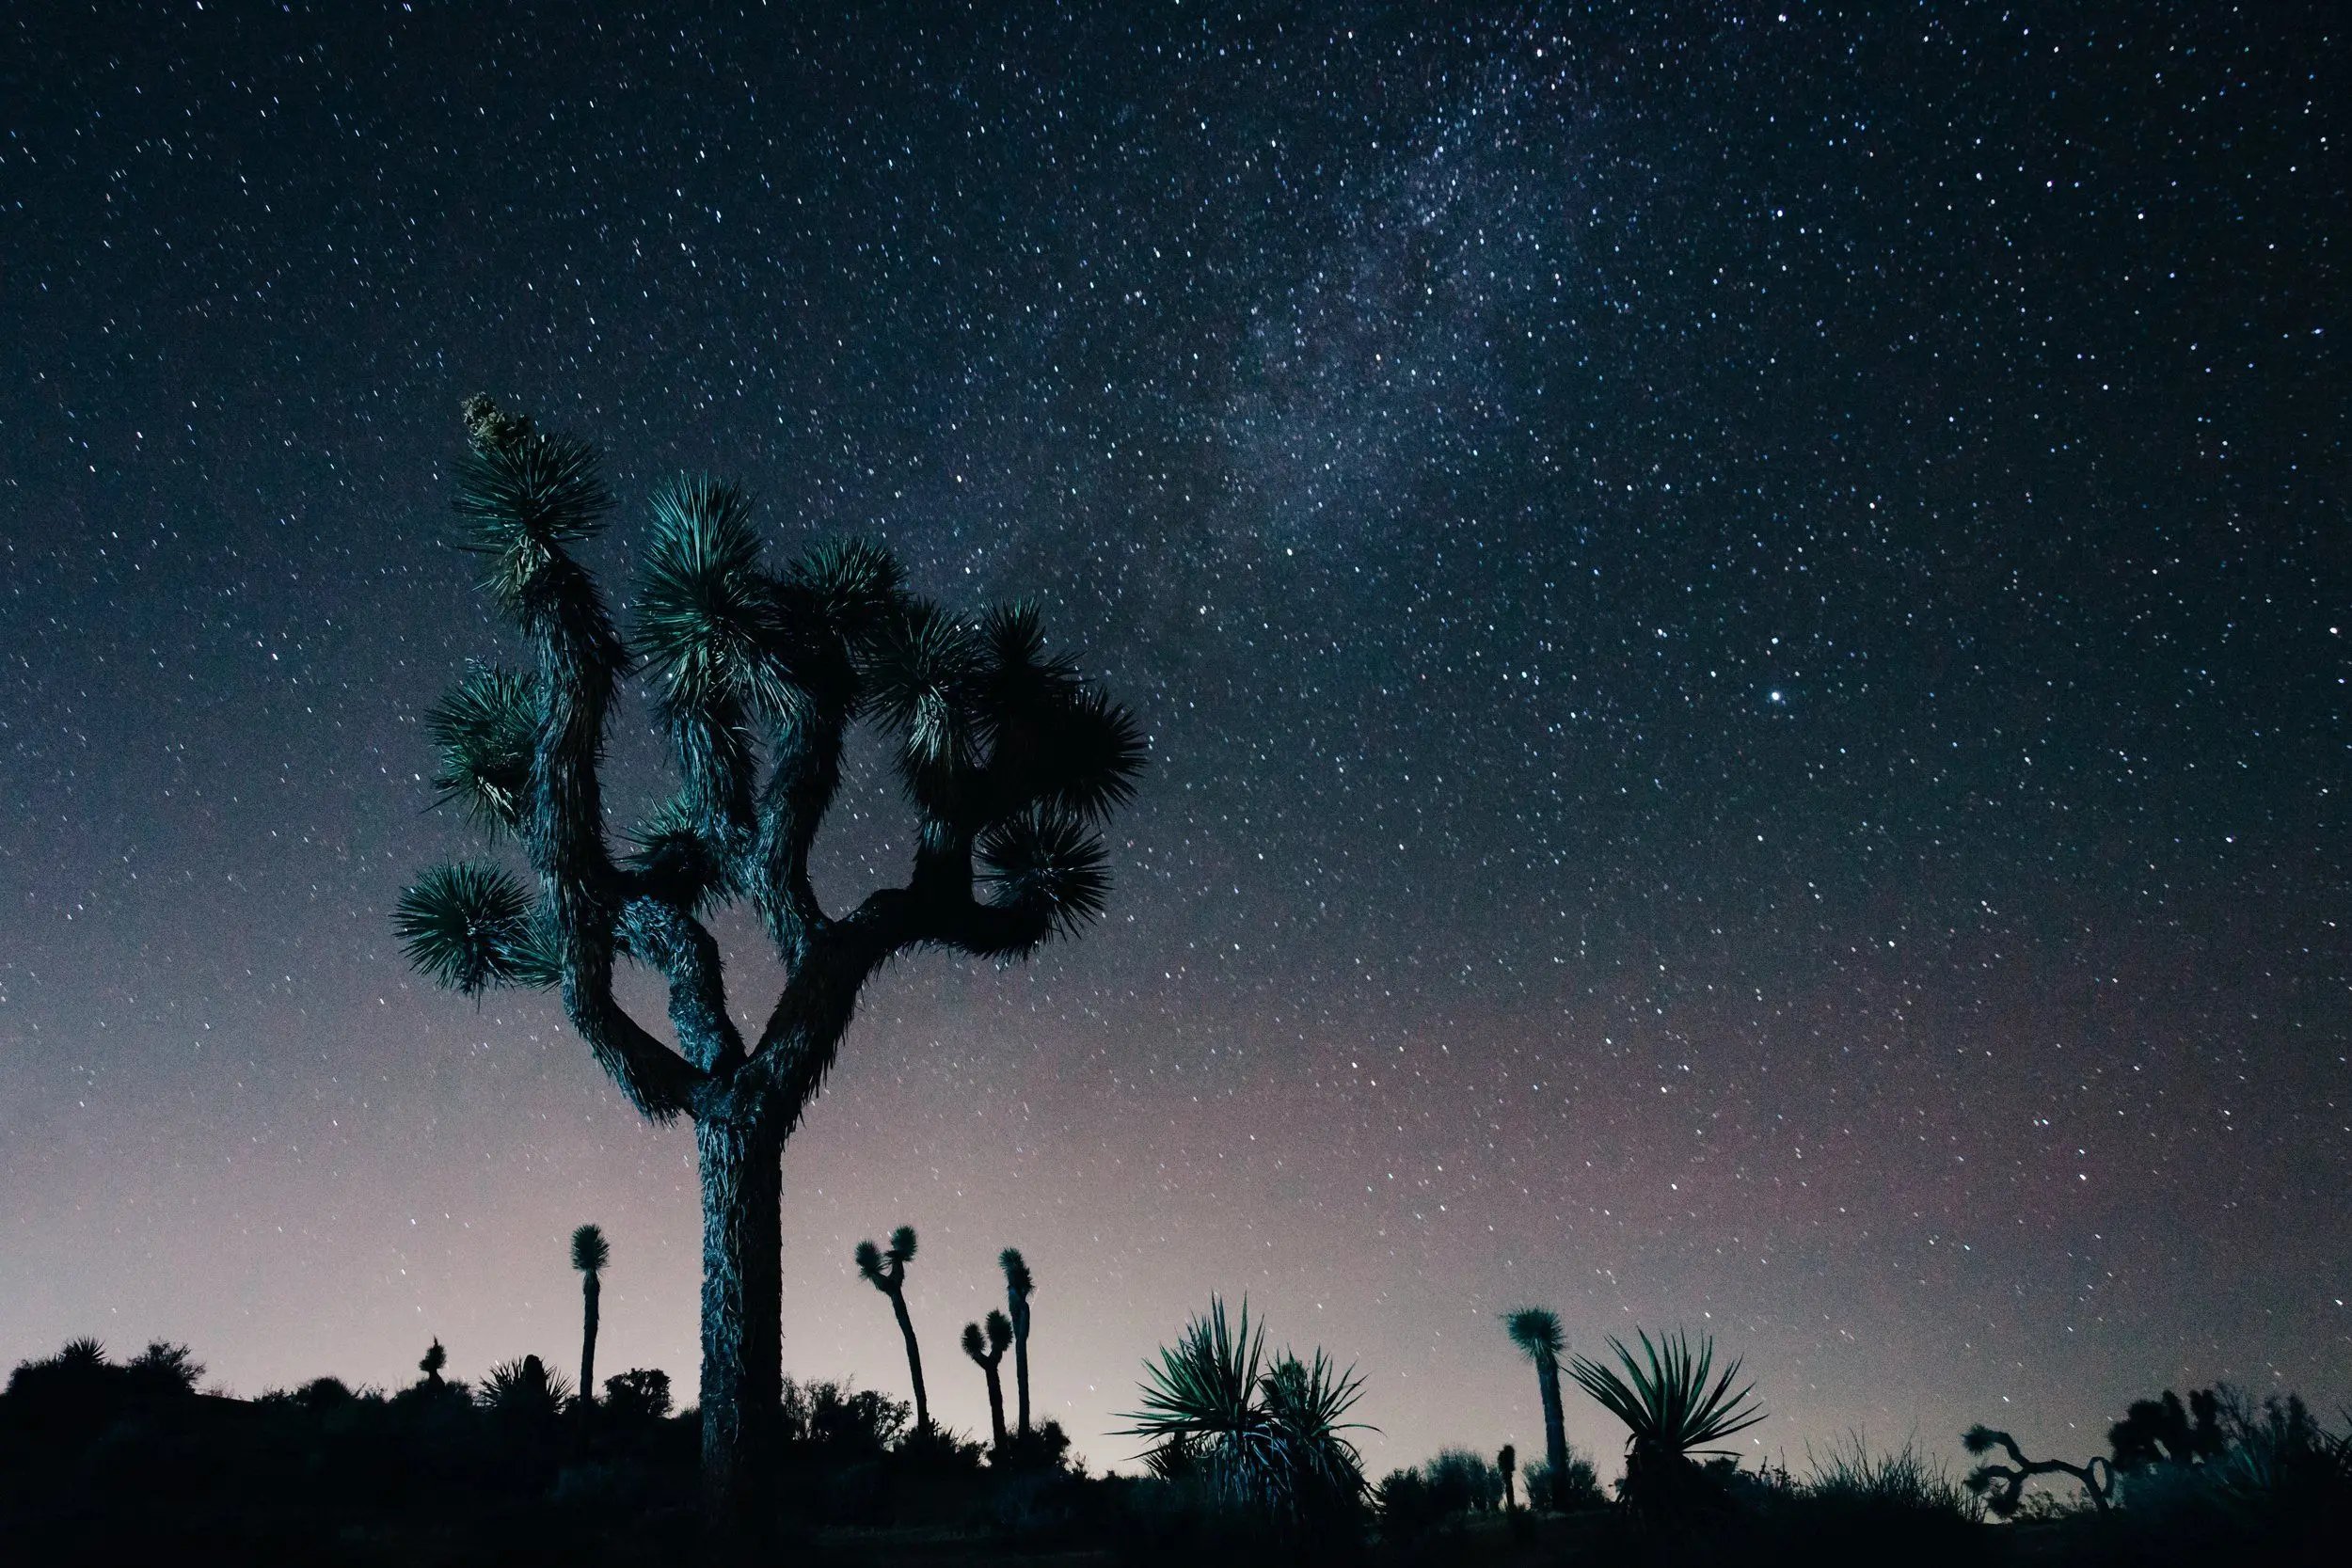 A single Joshua tree side-lit with turquoise light stands tall in front of a sea of stars in the clear night sky.